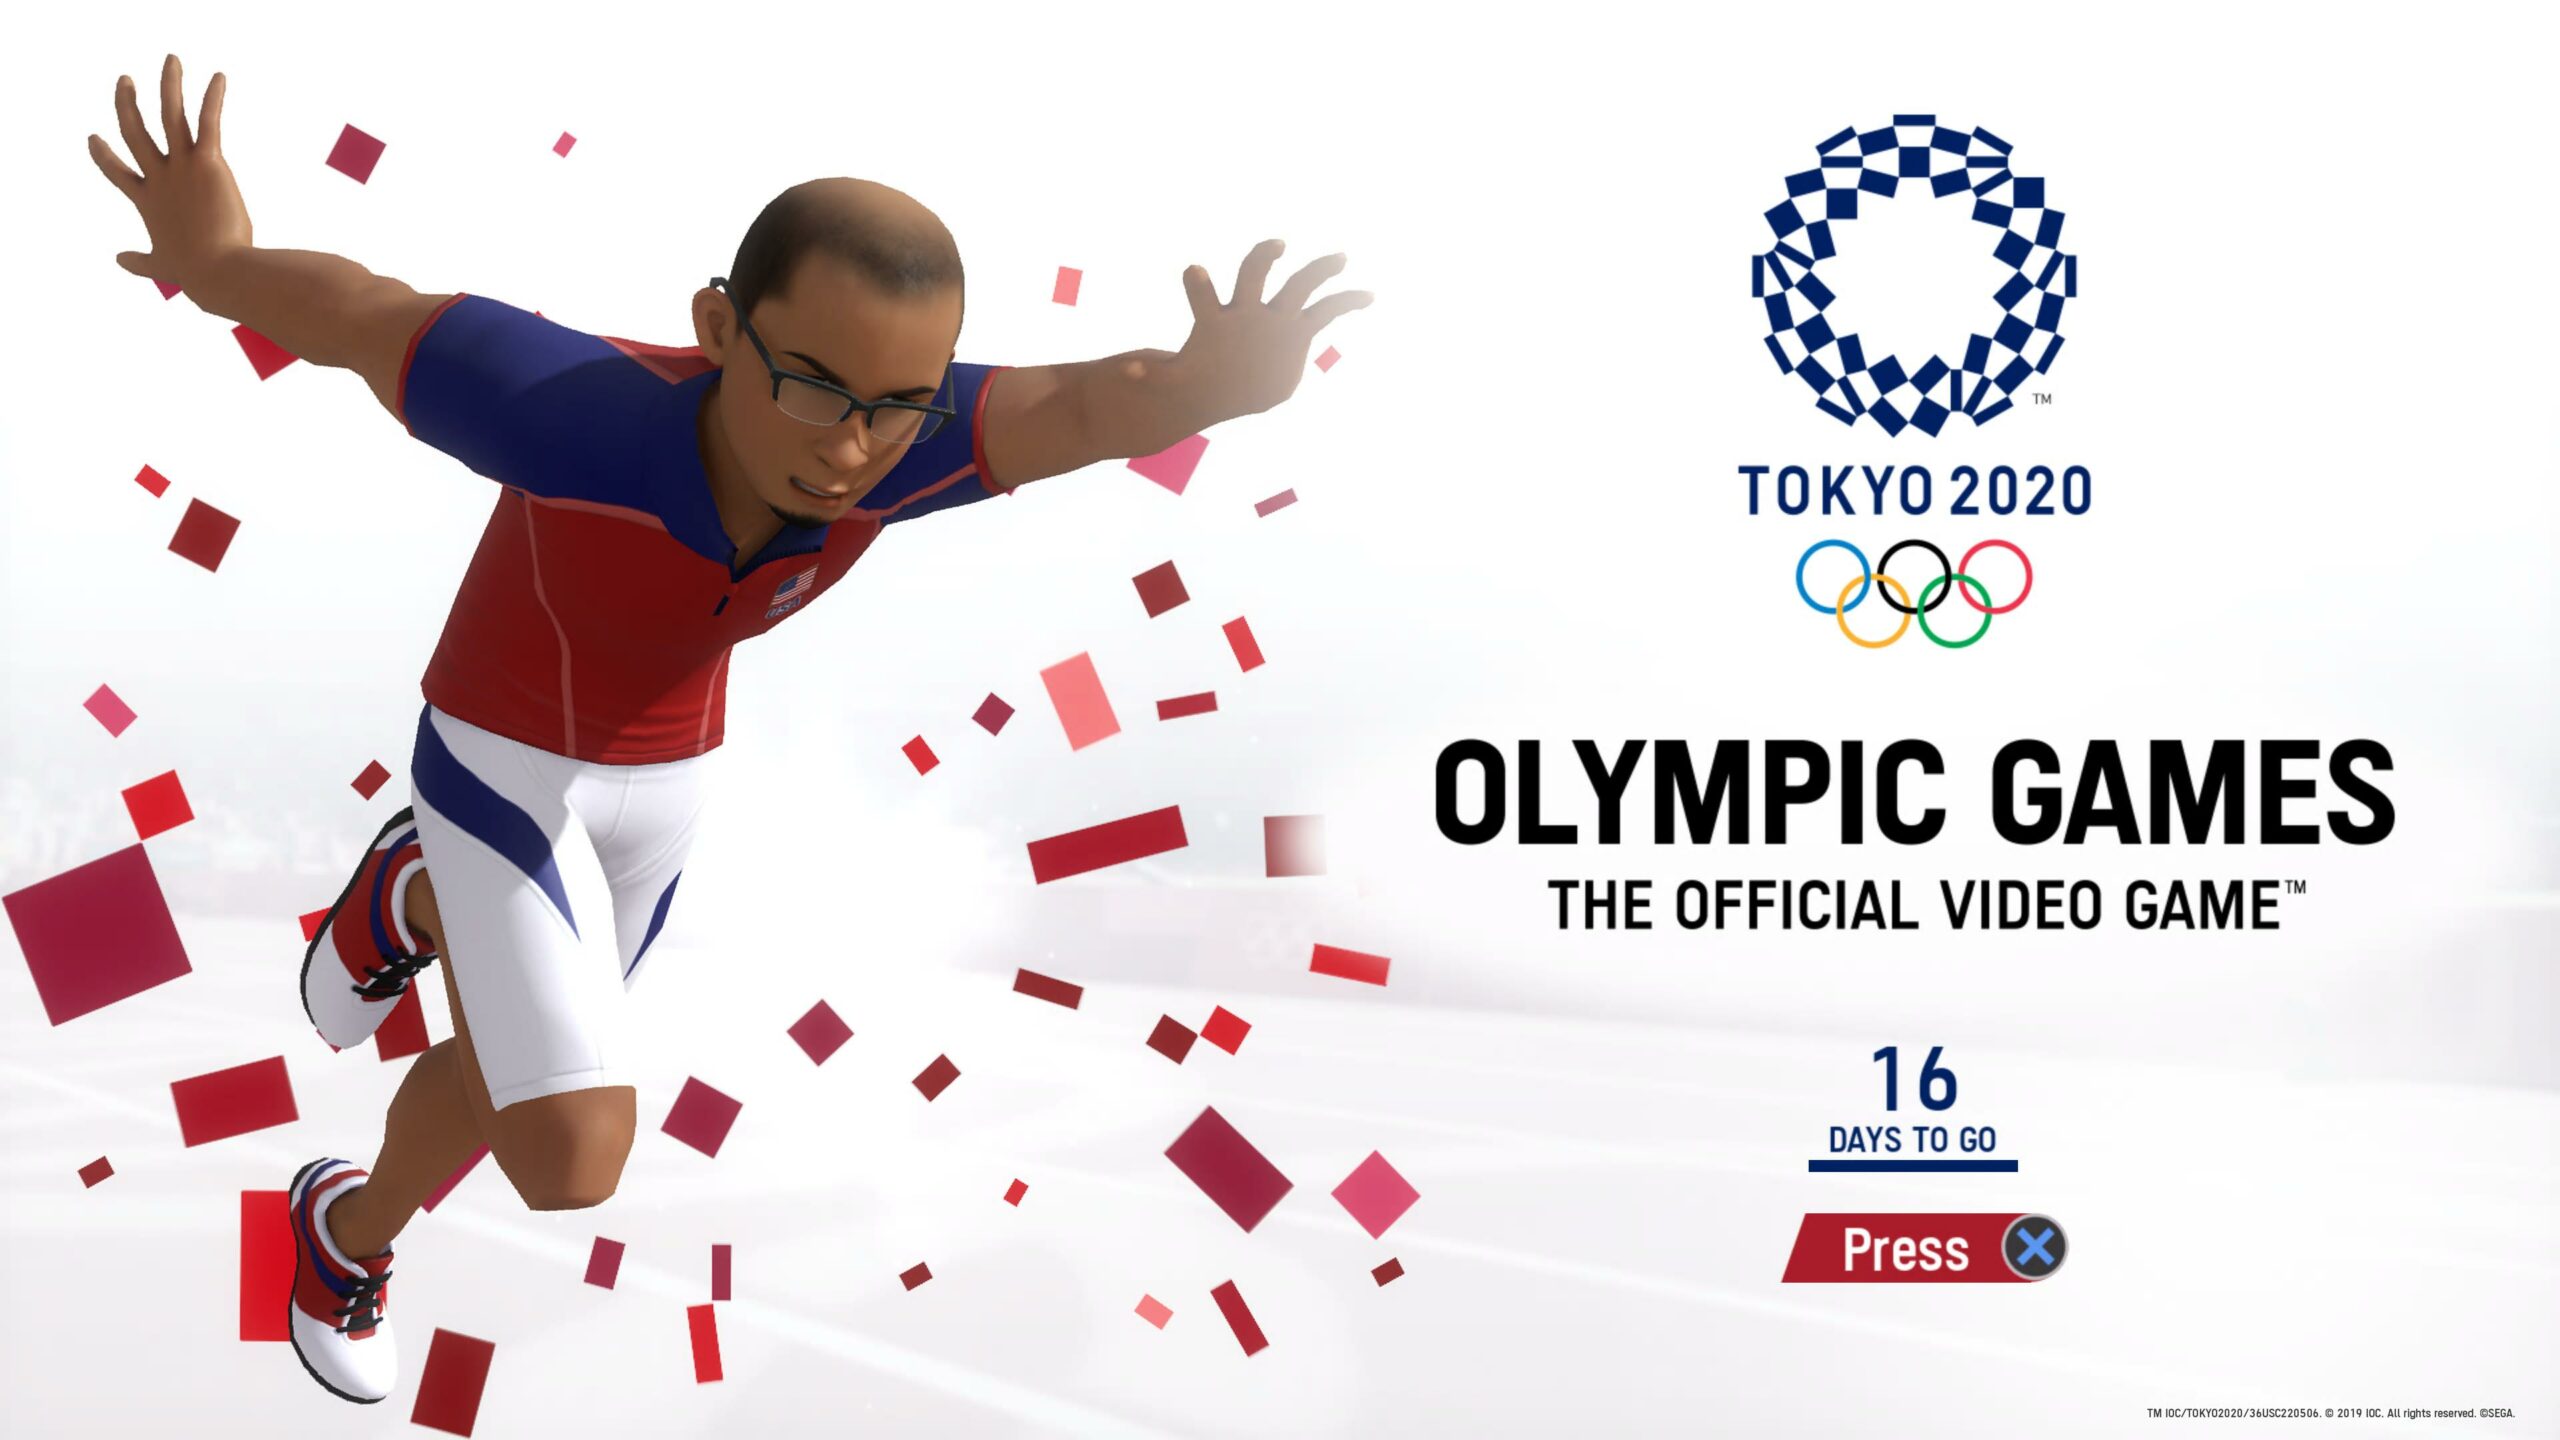 OLYMPIC GAMES TOKYO 2020 review